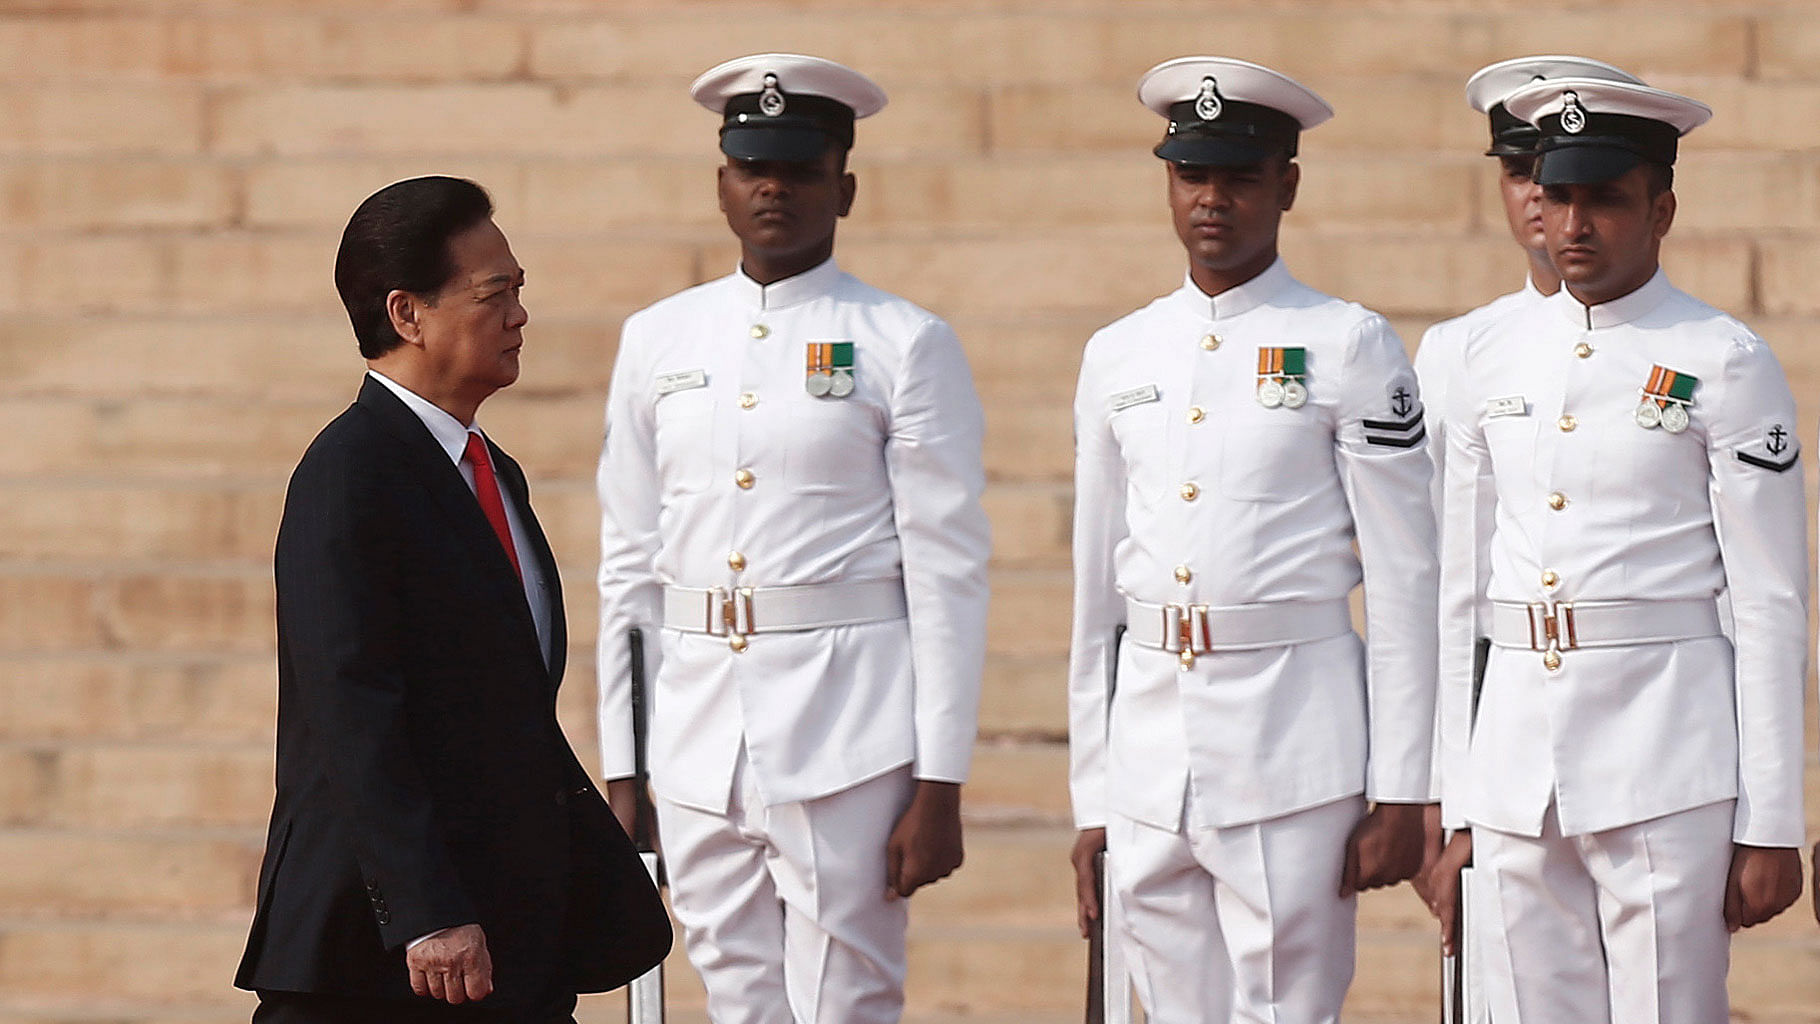 Vietnam’s Prime Minister Nguyen Tan Dung inspects a guard of honour during his ceremonial reception at the forecourt of India’s presidential palace Rashtrapati Bhavan in October 2014. (Photo: Reuters)